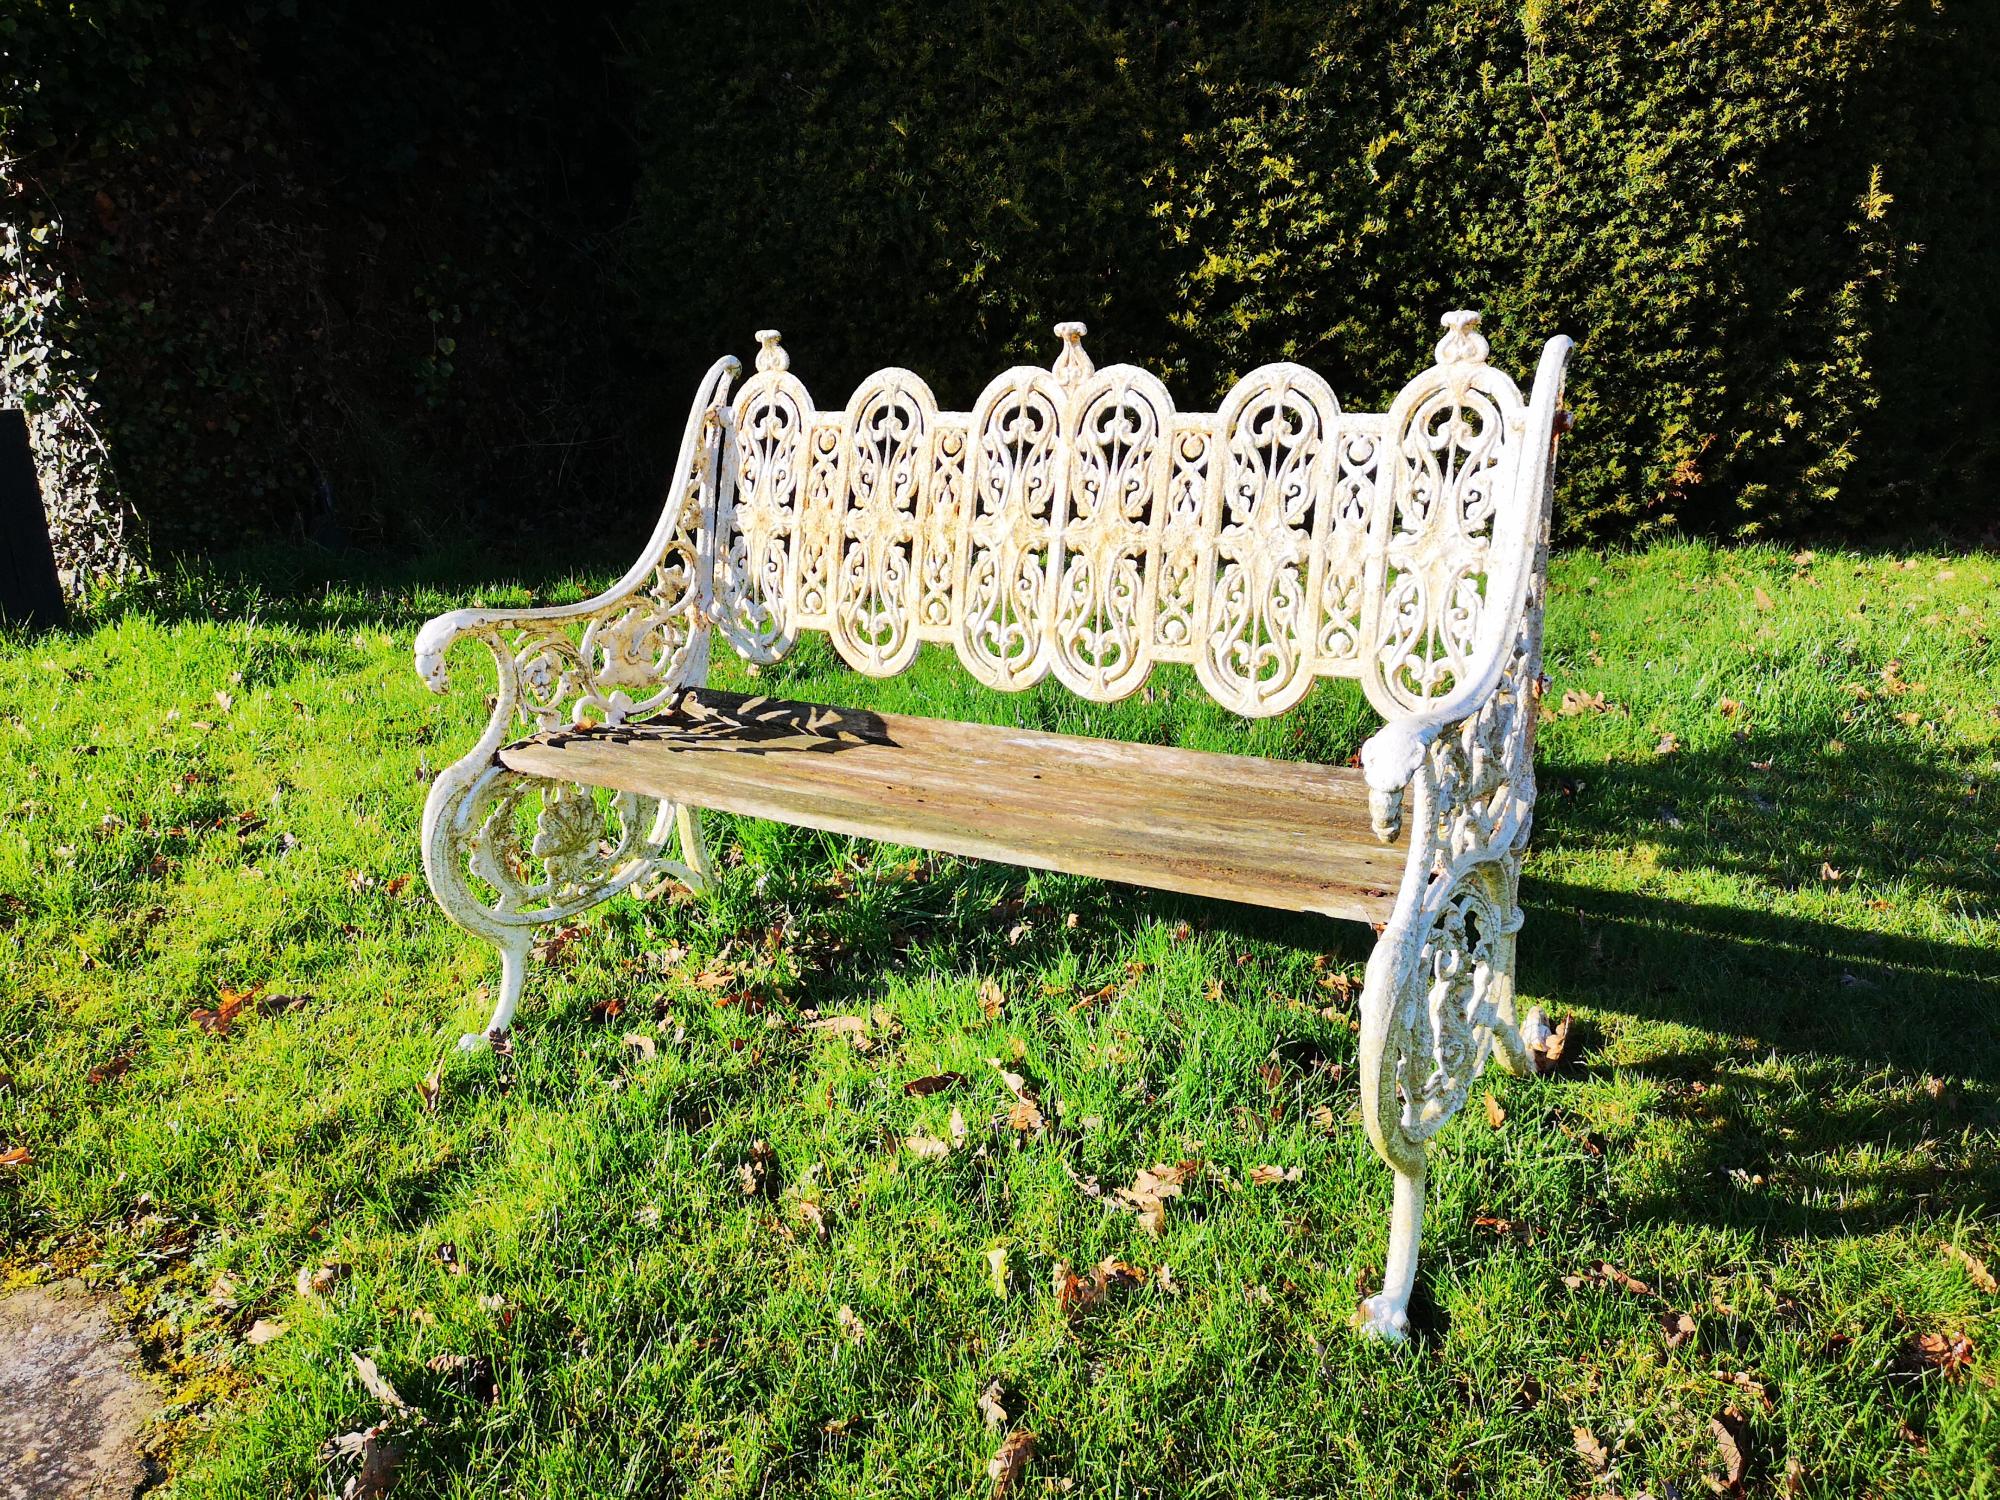 Garden seats: A Coalbrookdale cast iron seat, 2nd half 19th century, marks possibly obscured by